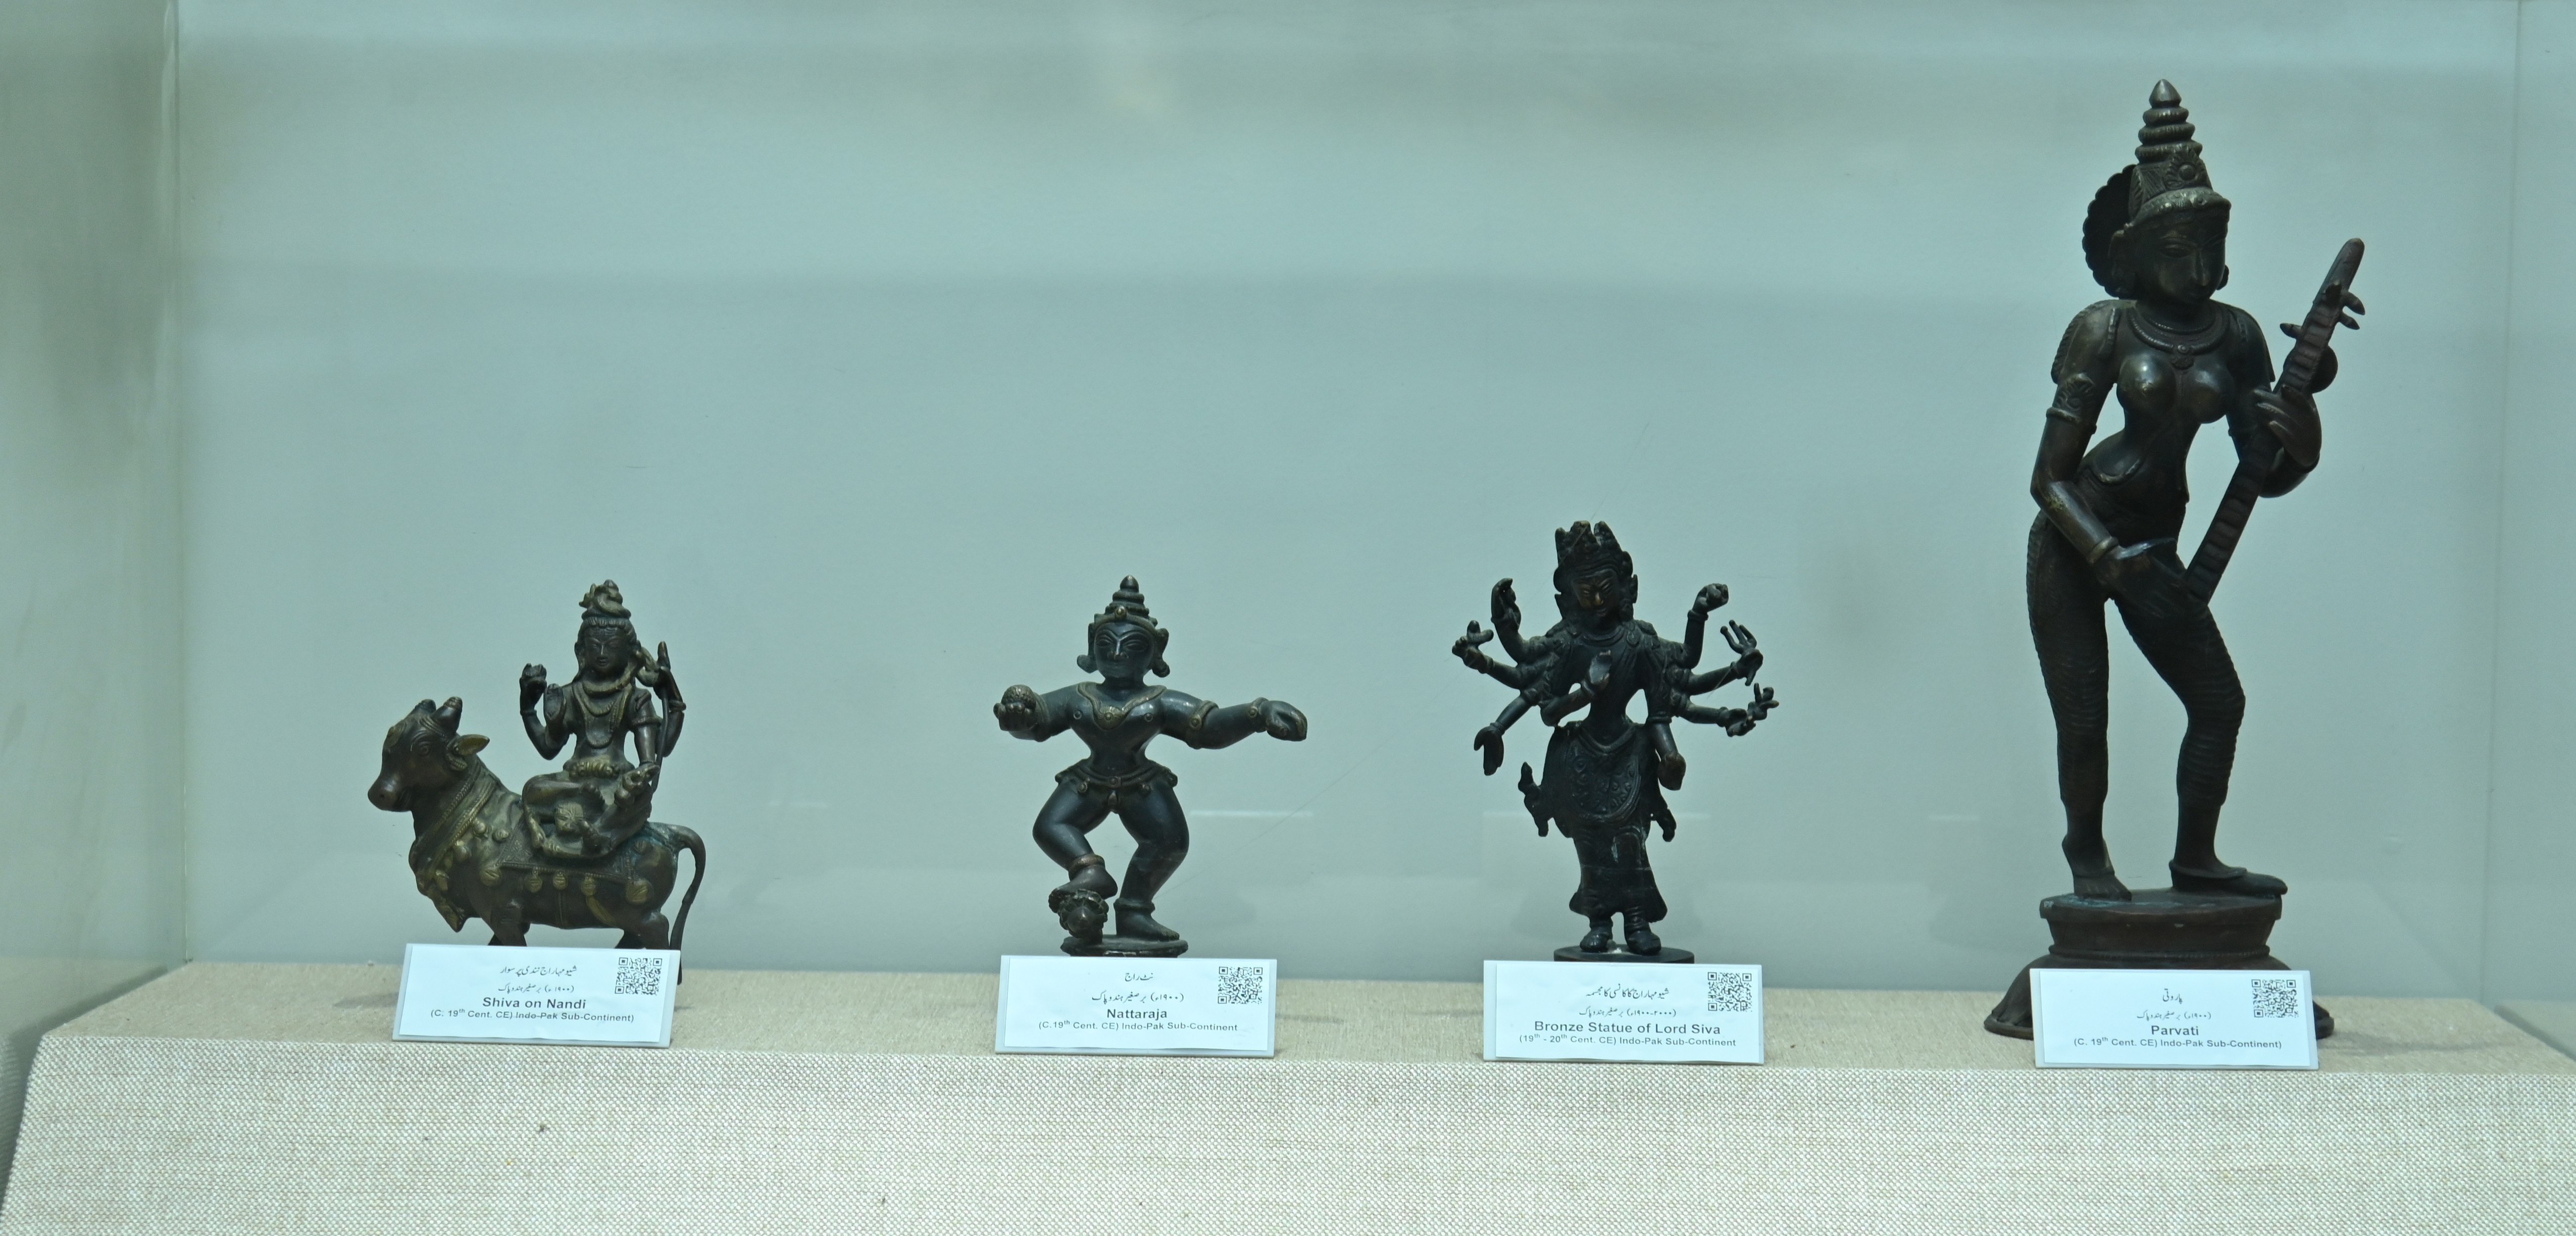 The Artifacts of the God and Goddess of Hindu religion preserved at the Sir Syed Memorial Museum